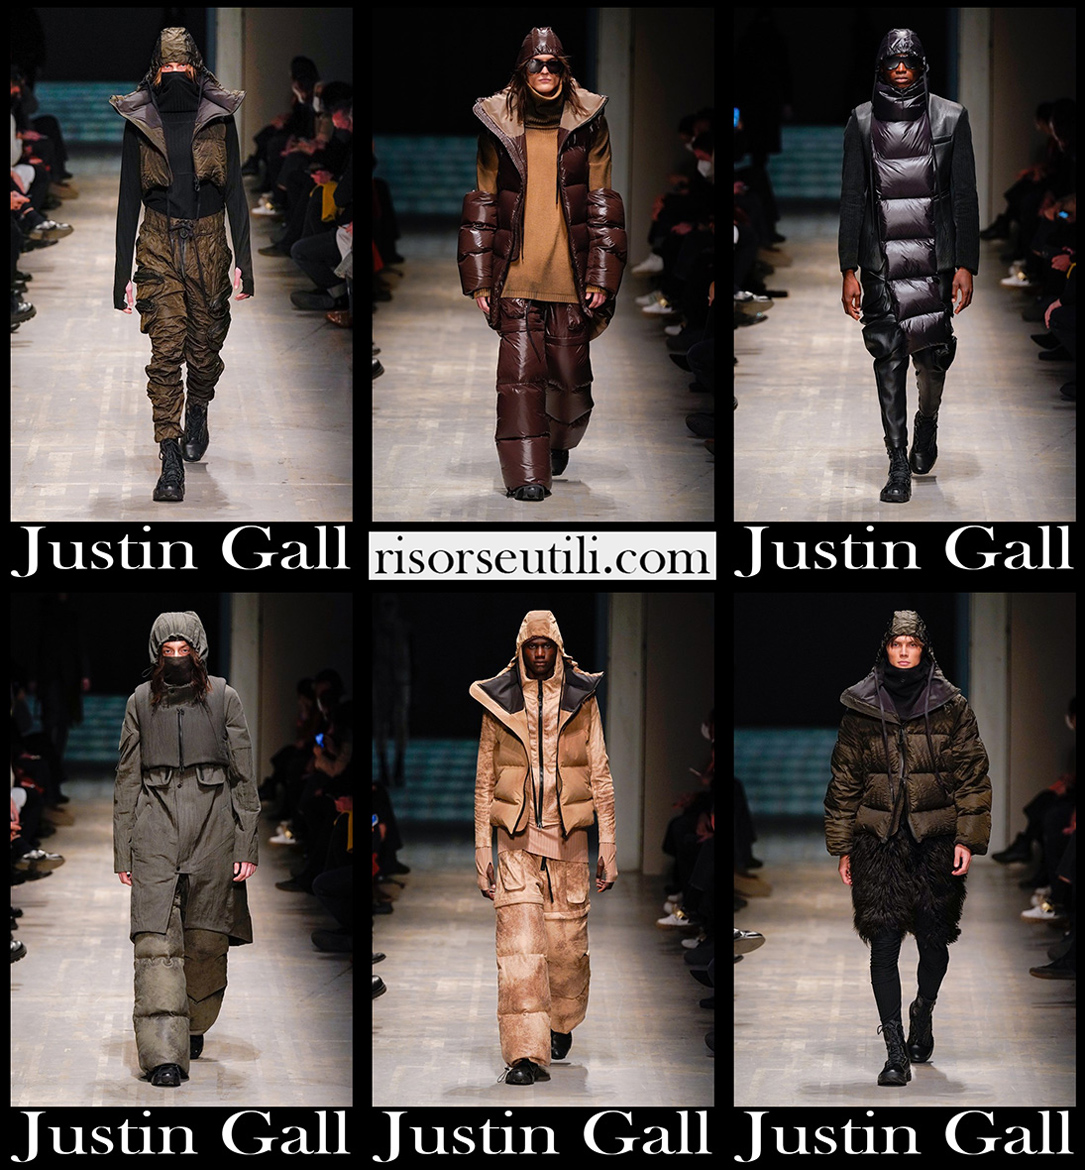 Justin Gall fall winter 2022 2023 mens fashion collection